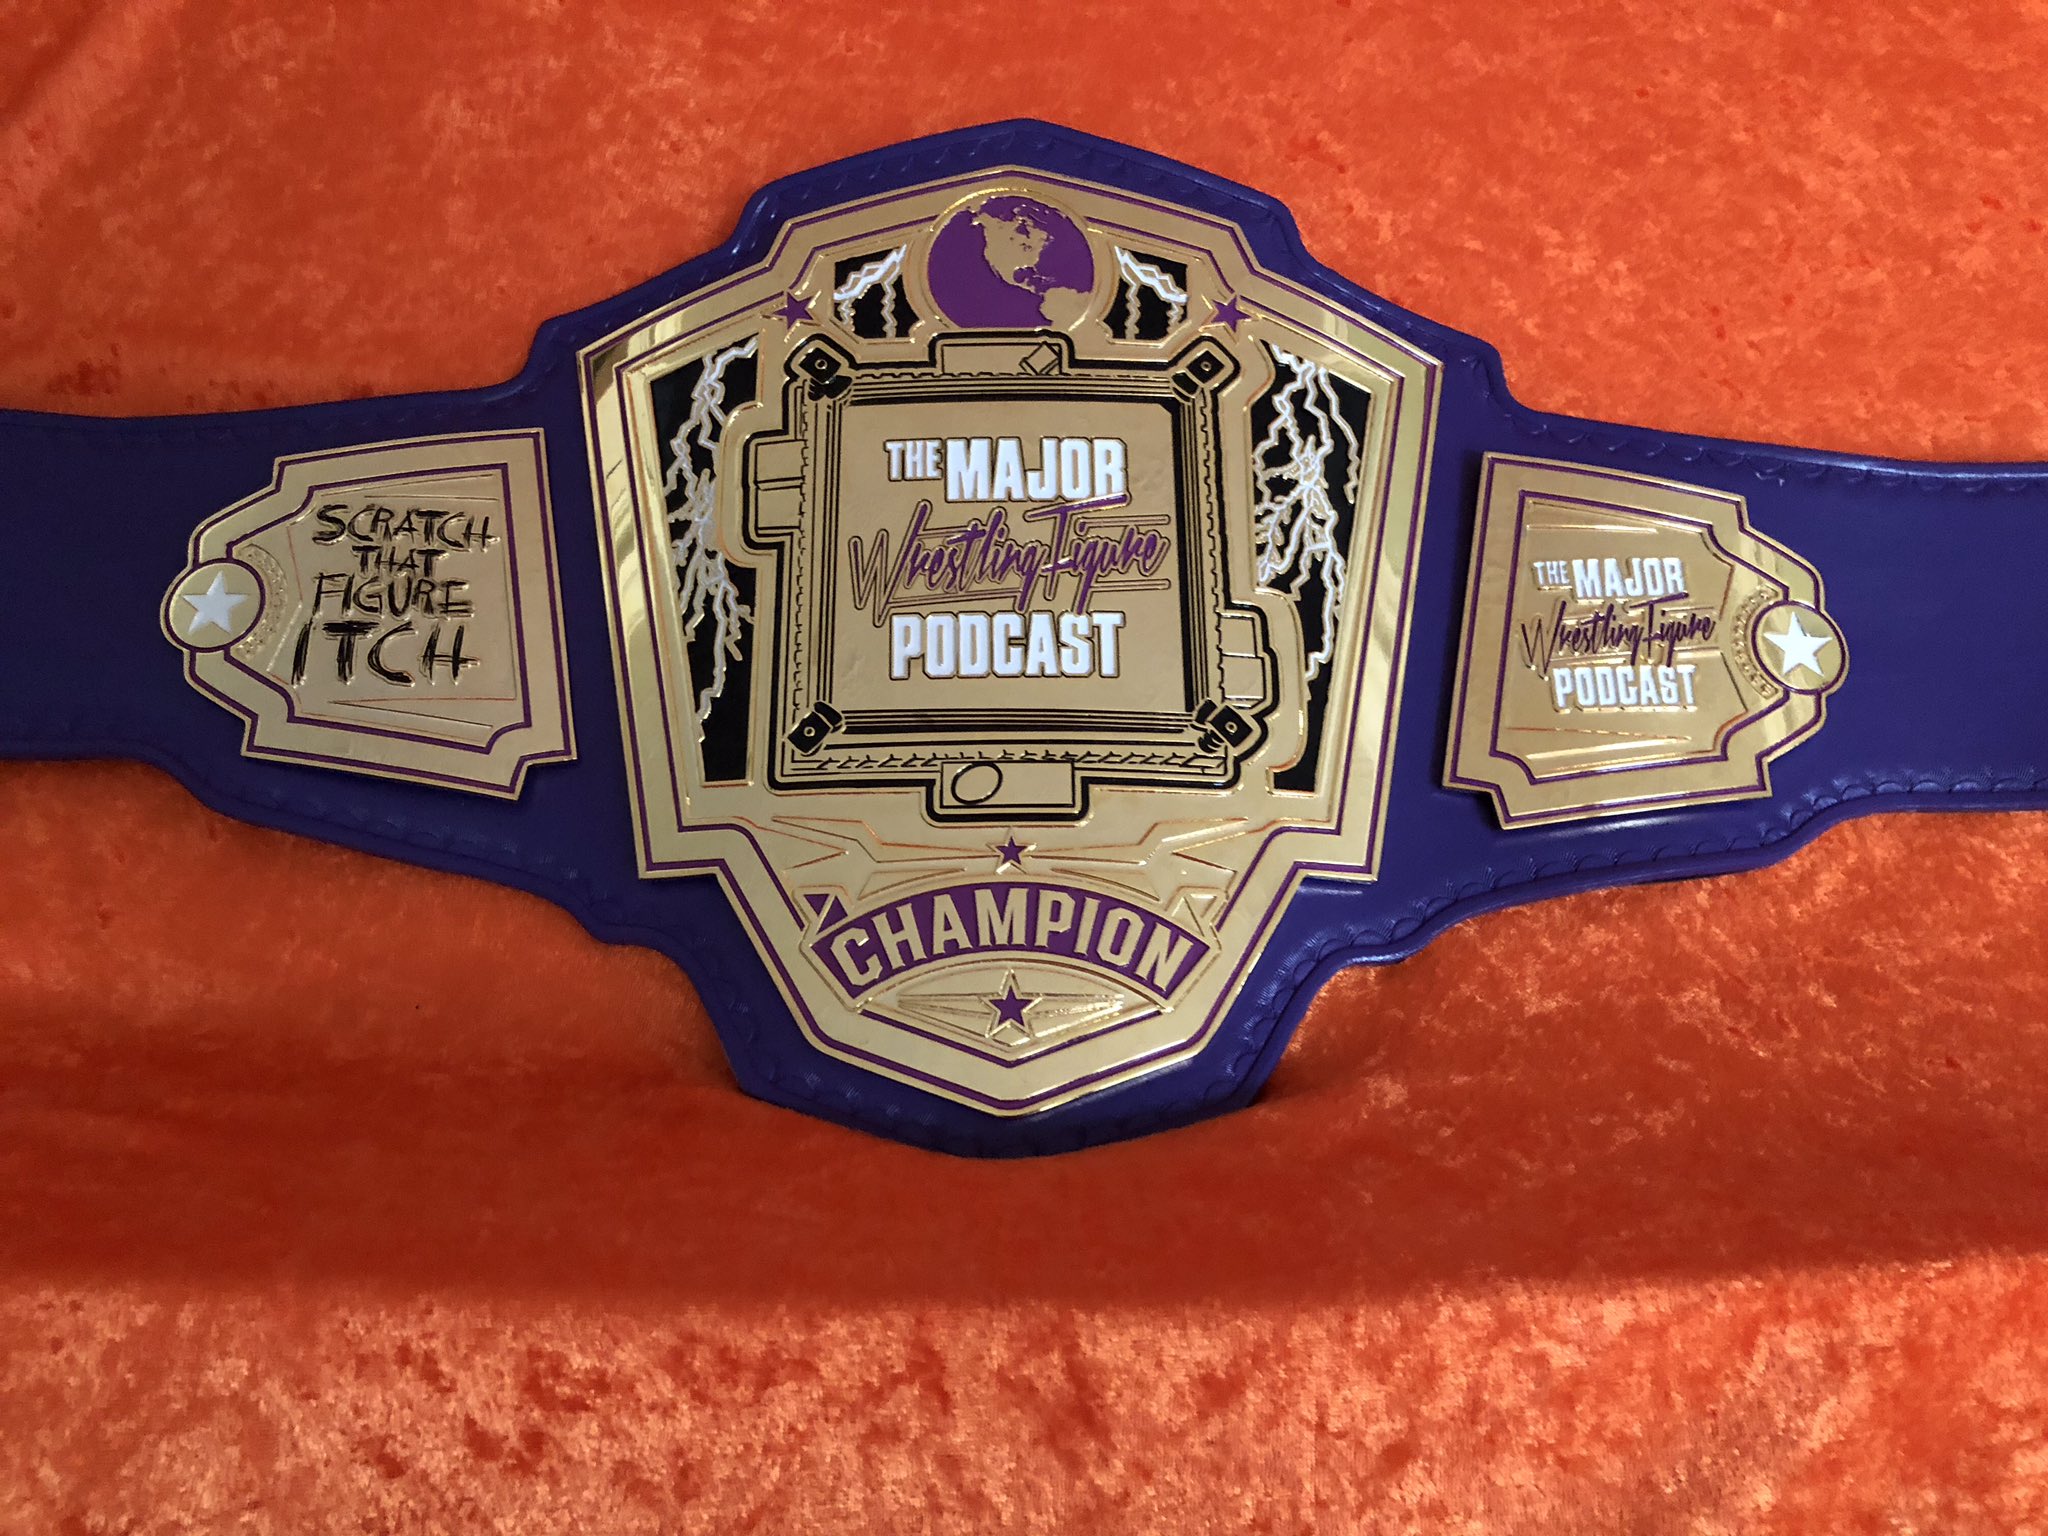 Details about   NEW SEALED Major Wrestling Figure Podcast Belt & Shirt MWFP Scratch That Itch